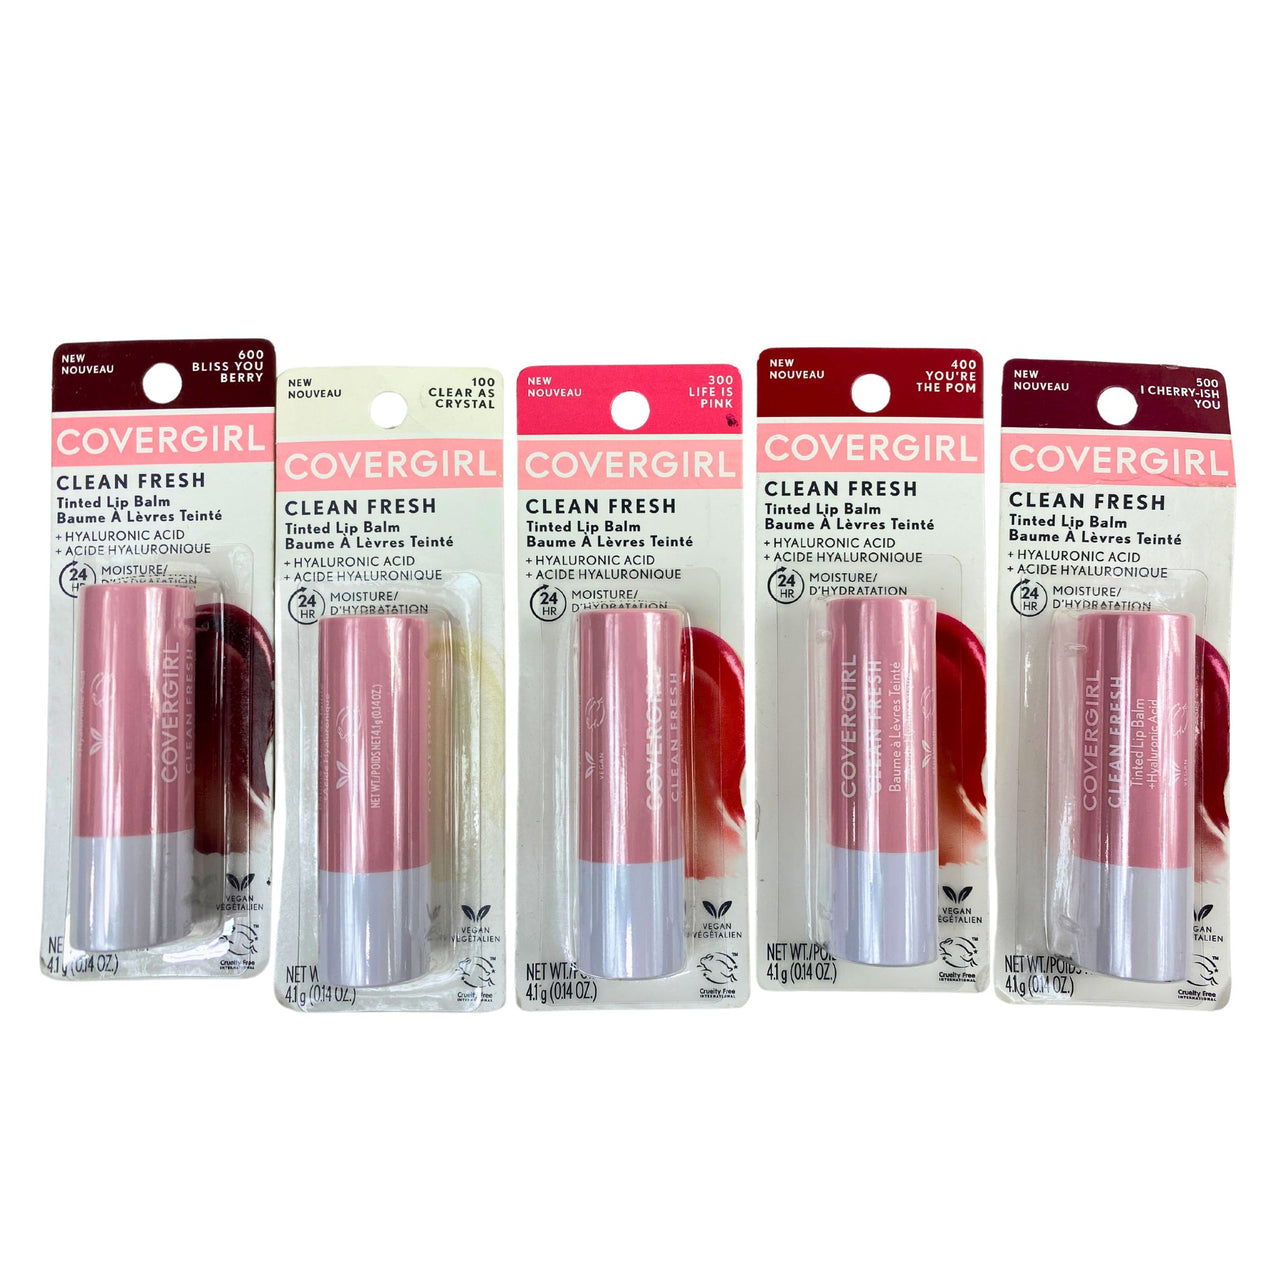 Covergirl Clean Fresh Tinted Lip Balm Assorted Mix